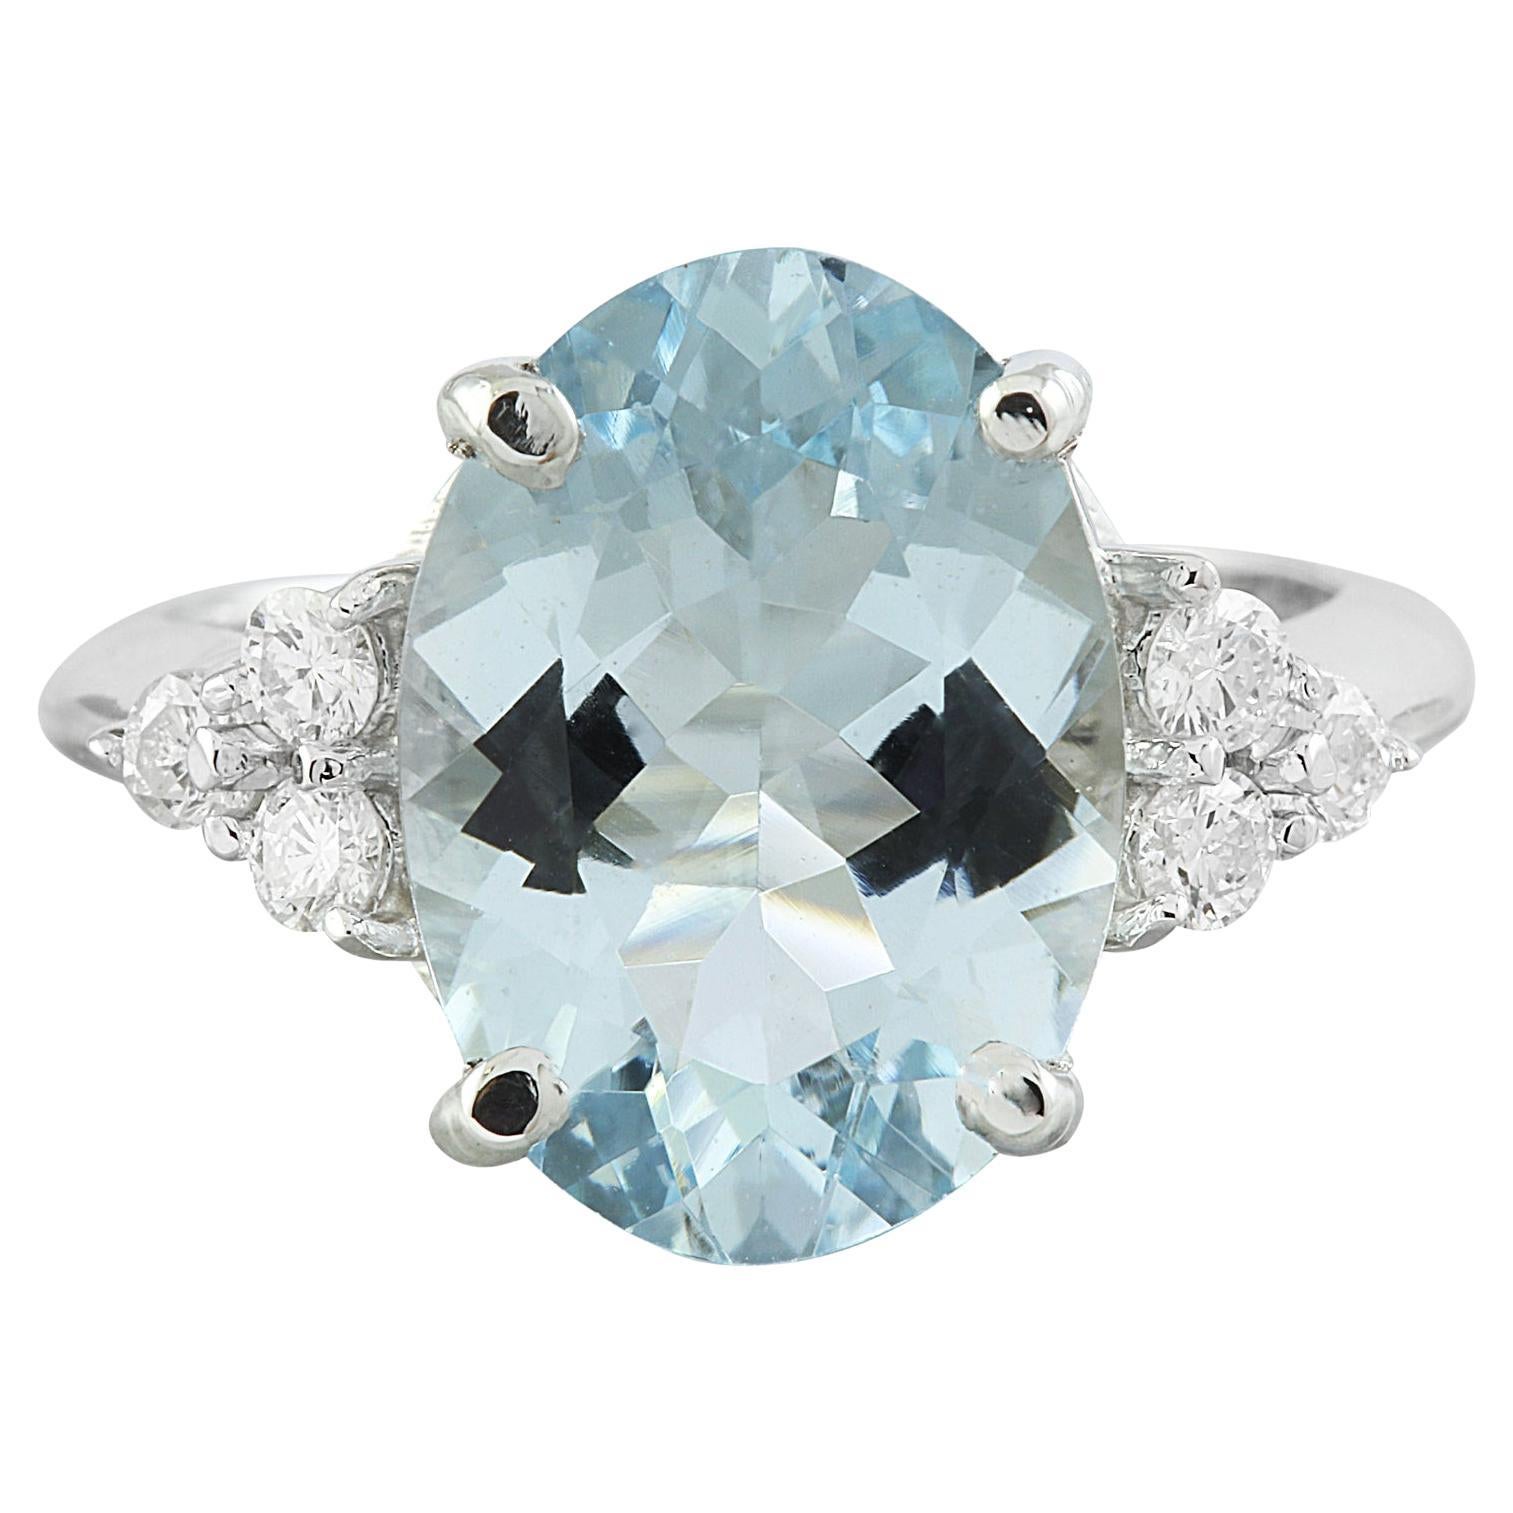 Dazzling Aquamarine Diamond Ring: Exquisite Beauty in 14K Solid White Gold